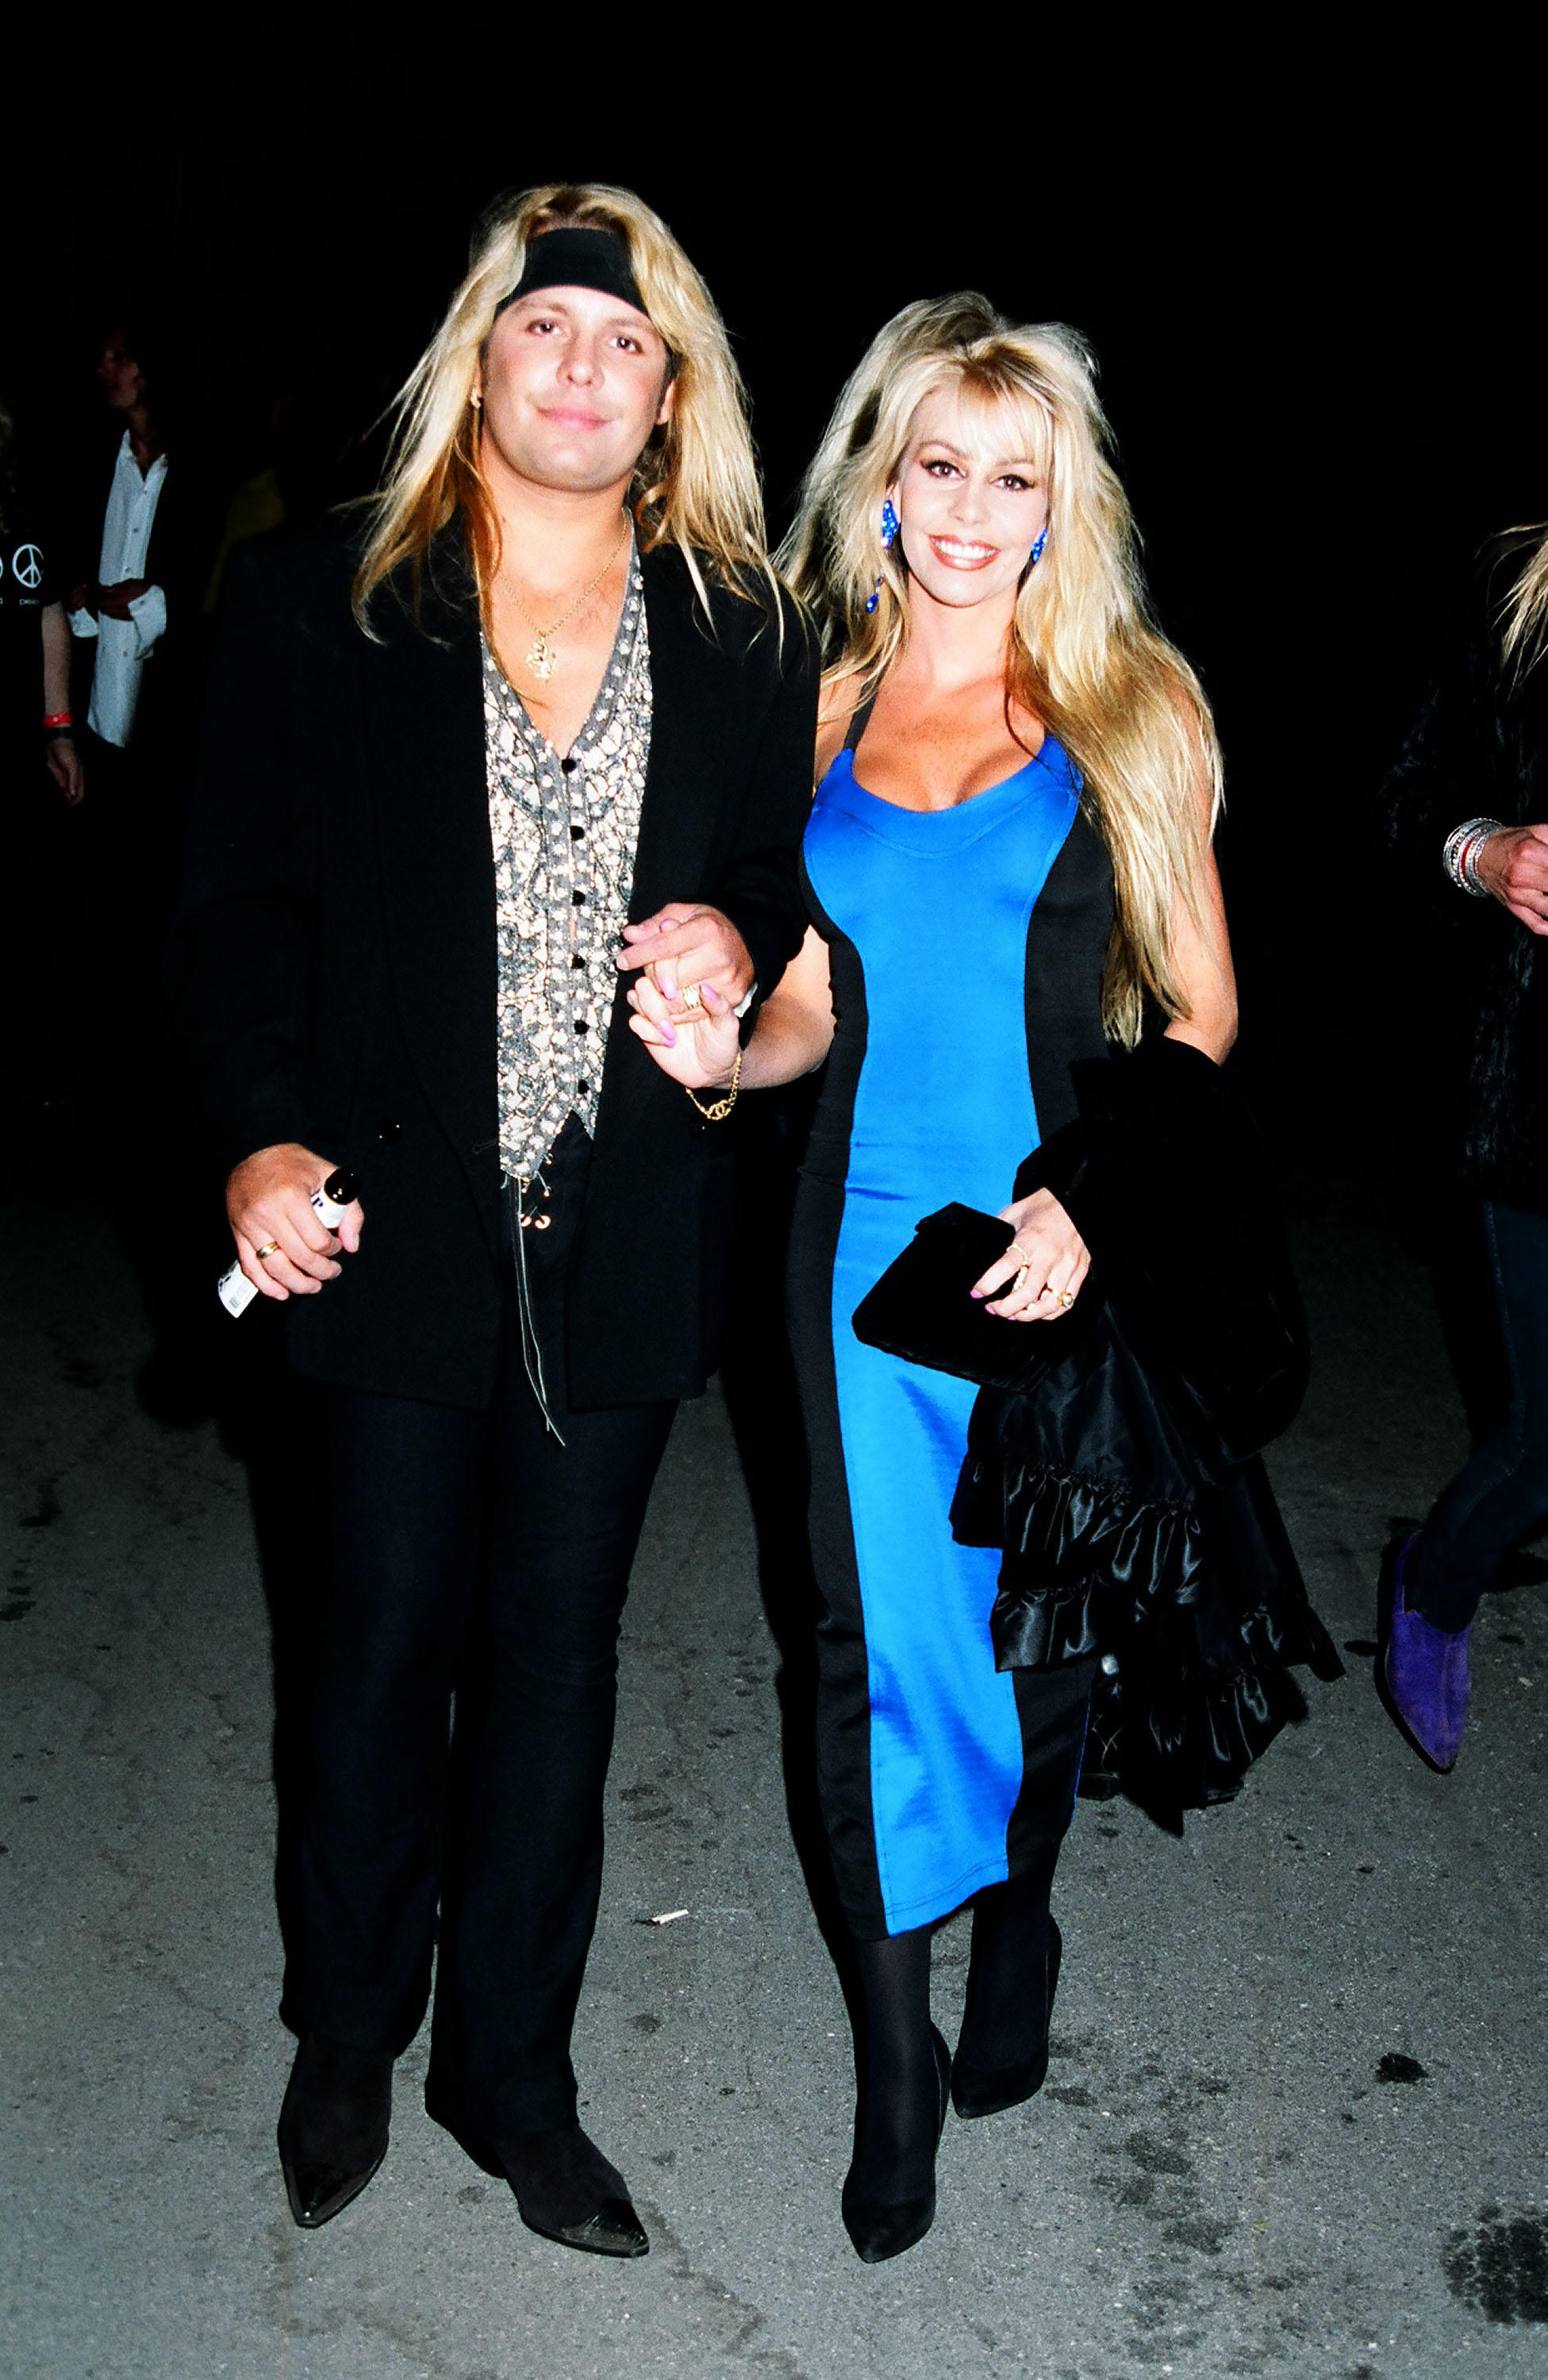 Vince Neil and Sharise Ruddell during the MTV Movie Awards in Culver City, California, on June 8, 1992 | Source: Getty Images